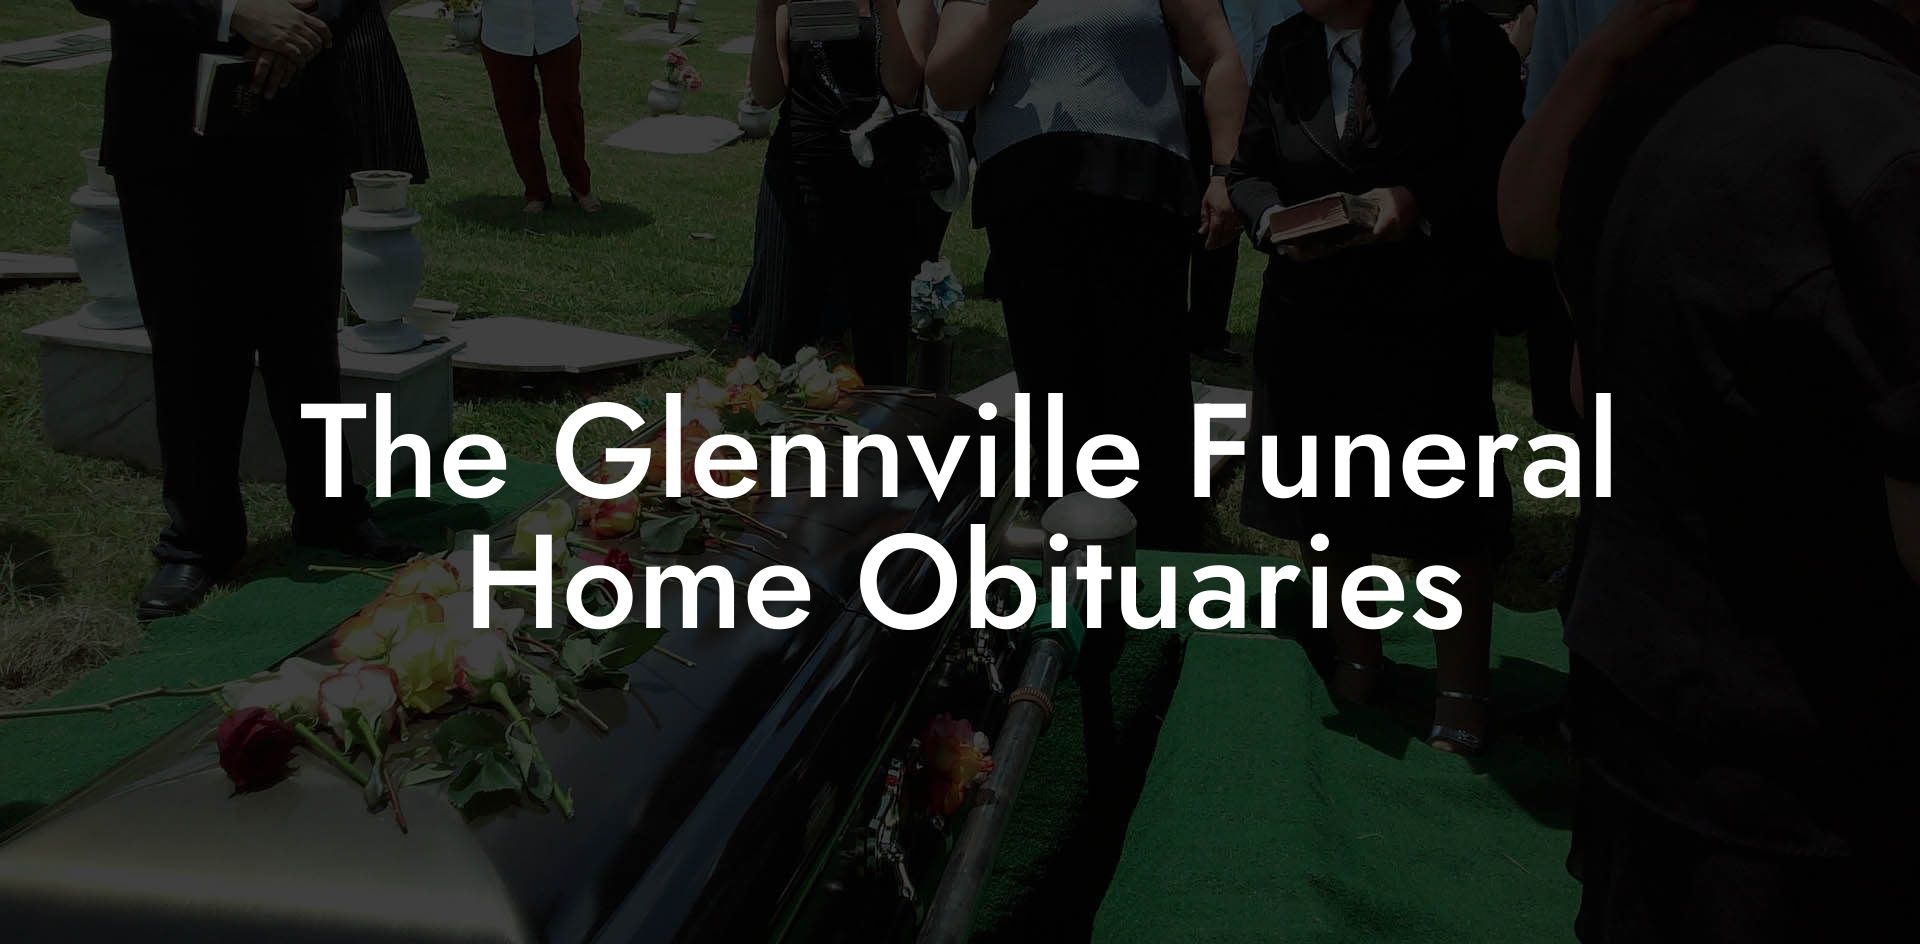 The Glennville Funeral Home Obituaries